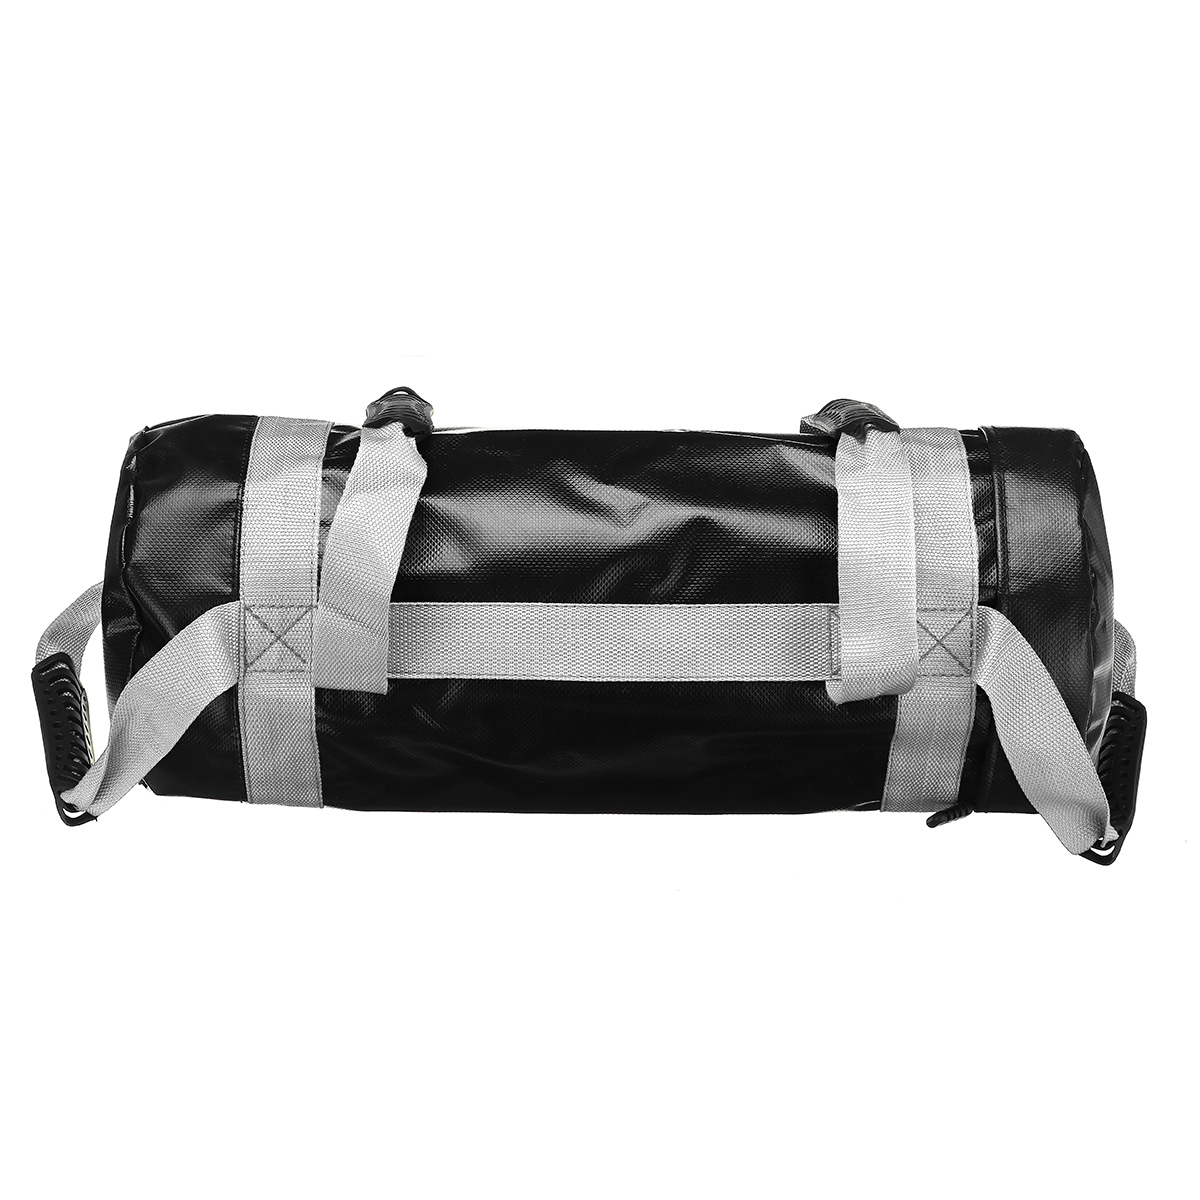 5-30KG Weight Lifting Double End Sandbag Boxing Fitness Workout Multifunctional Physical Training Exercise Heavy Duty Power Bag